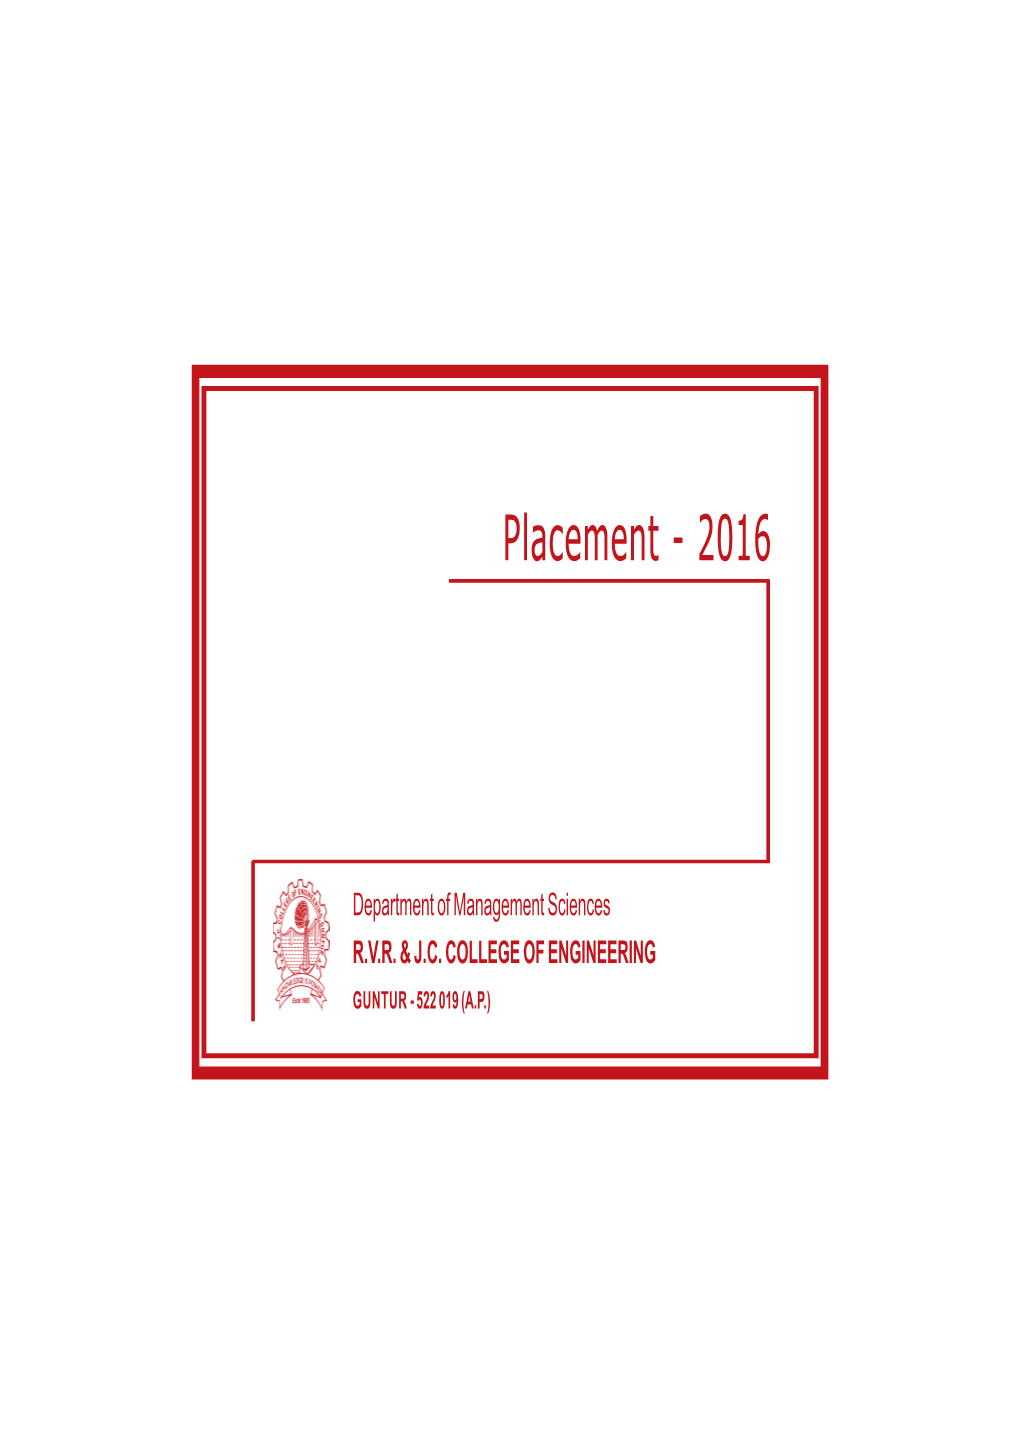 Placement - 2016